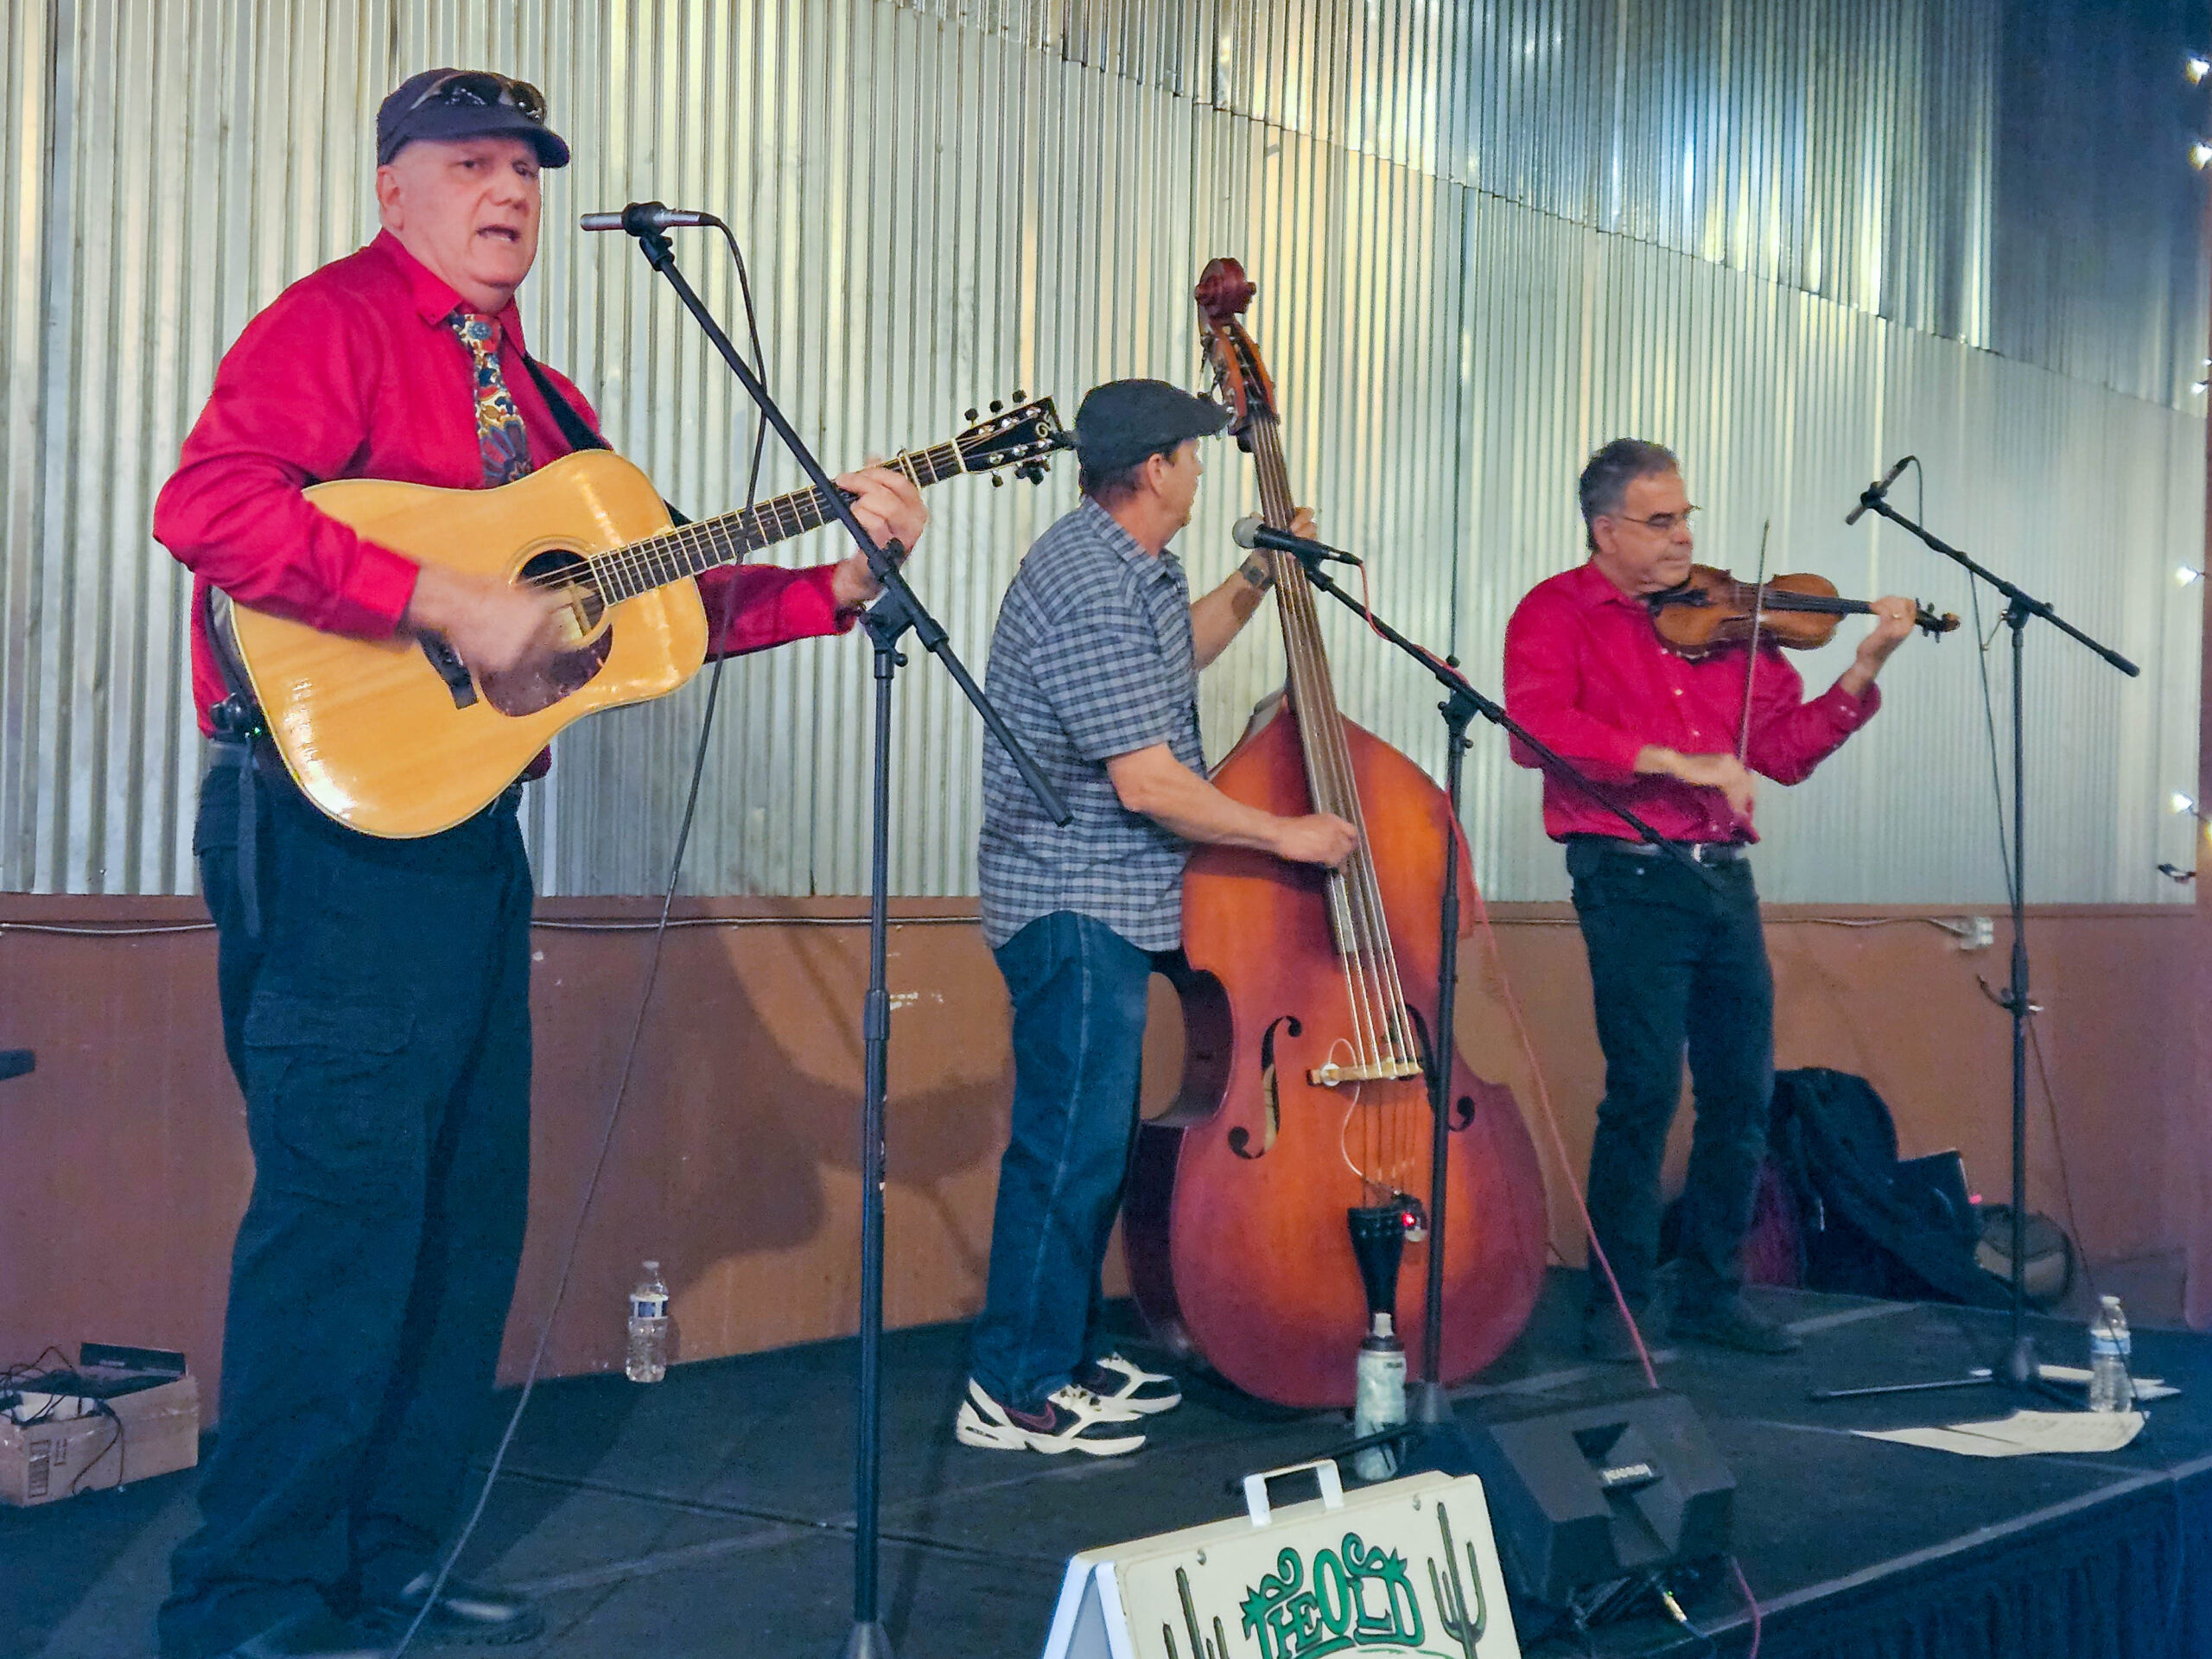 Performance by Old Pueblo Bluegrass Band